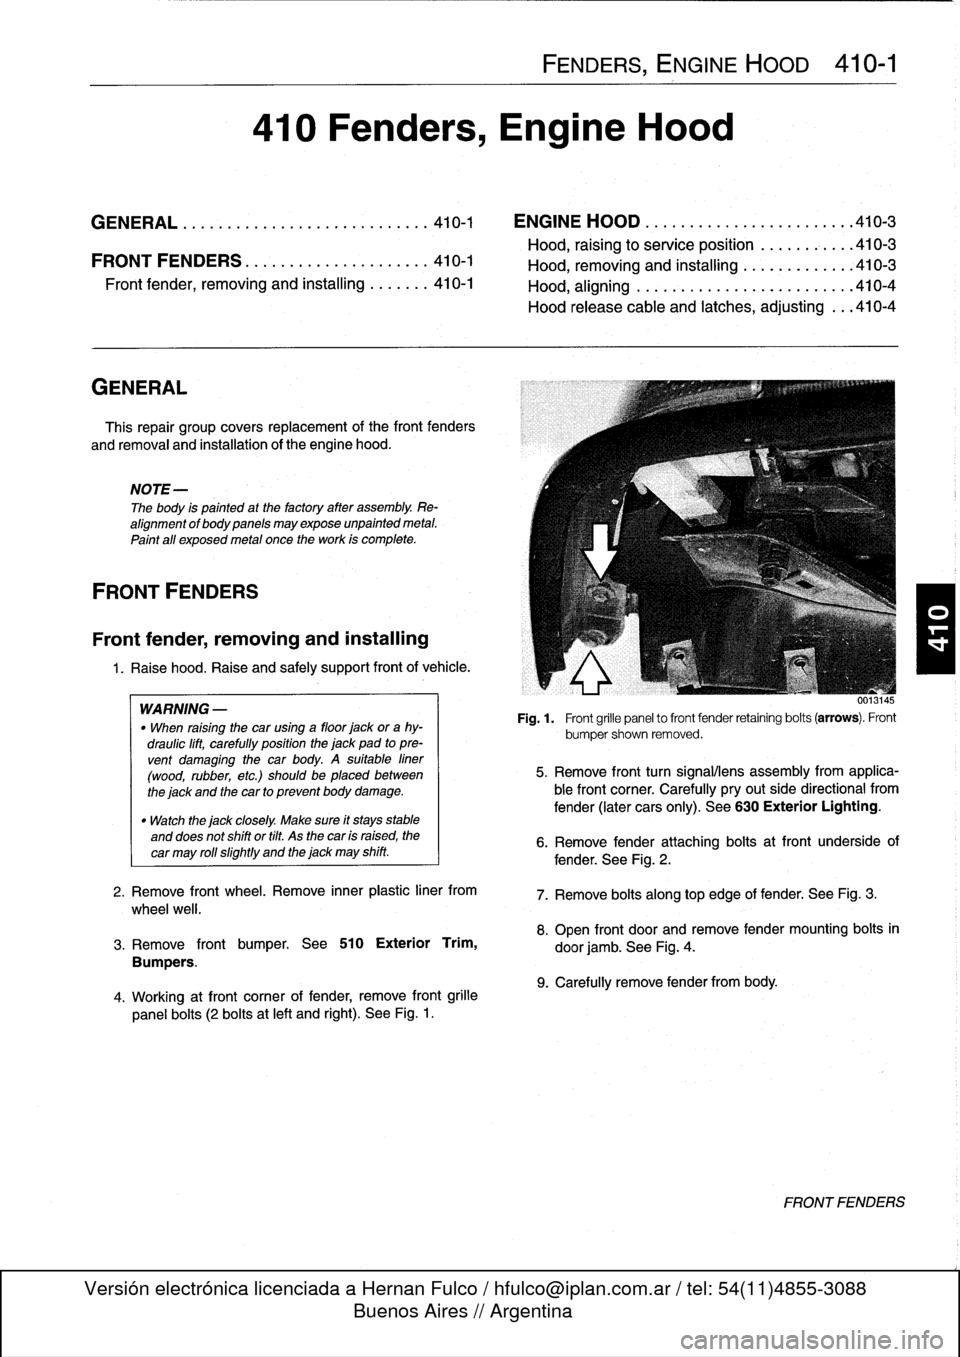 BMW 323i 1997 E36 Workshop Manual 
GENERAL

This
repair
group
covers
replacement
of
the
front
fenders

and
removal
and
installation
of
the
engine
hood
.

NOTE-

The
body
is
painted
at
the
factoryafter
assembly
.
Re-
alignment
of
body
